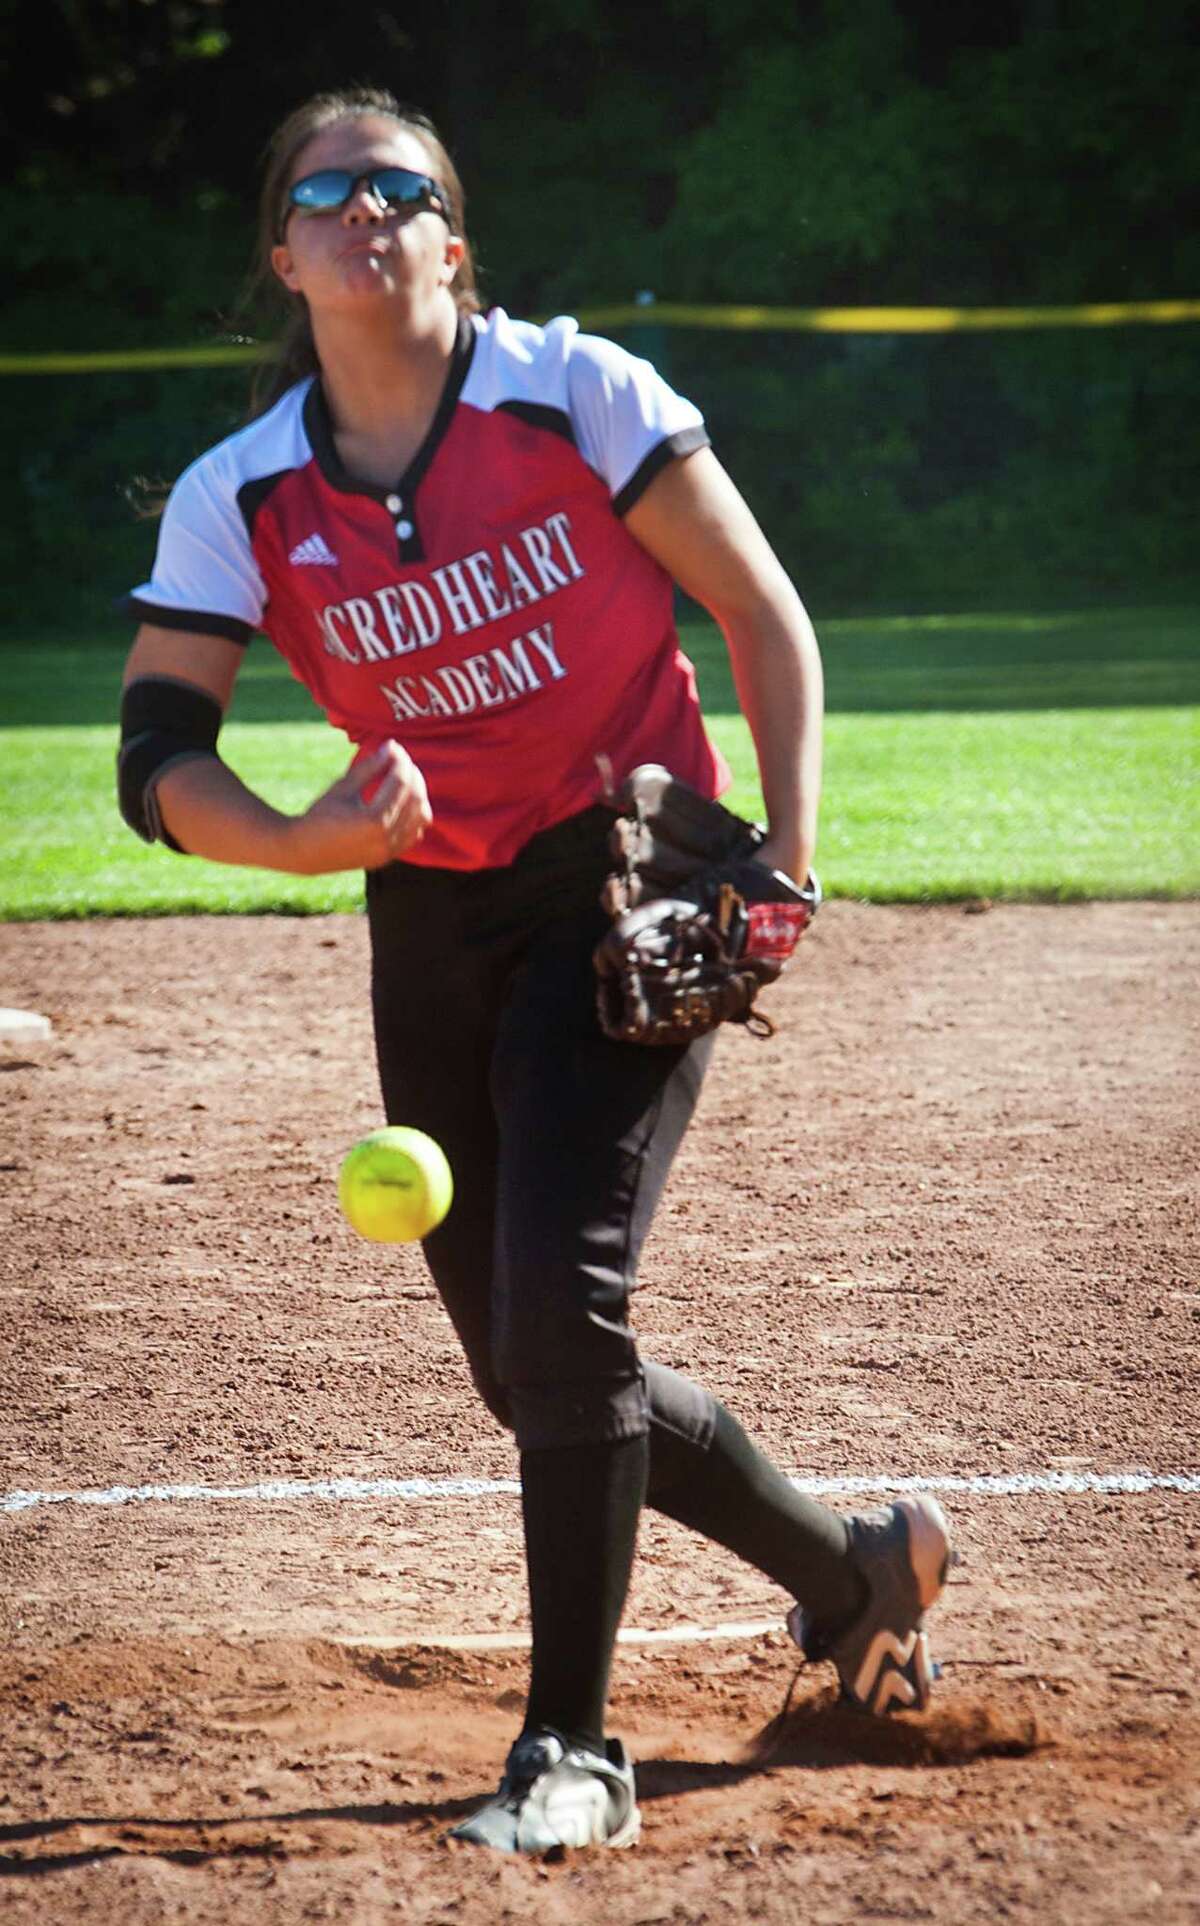 (Melanie Stengel - New Haven Register) Sacred Heart catcher Molly Flowers holds Law to just run 6/6.